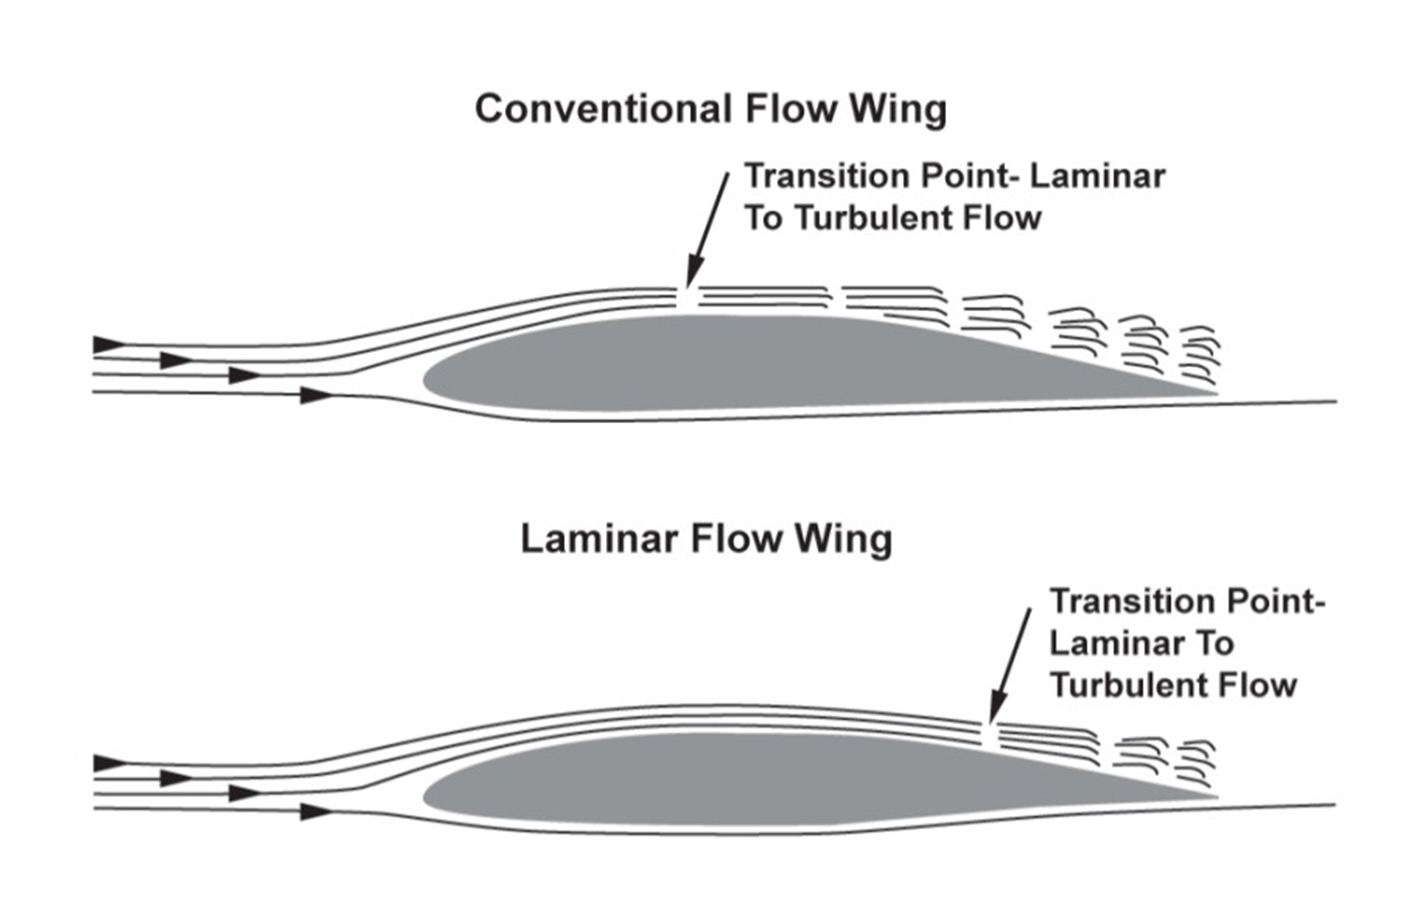 Insect buildup on wings can disrupt laminar flow